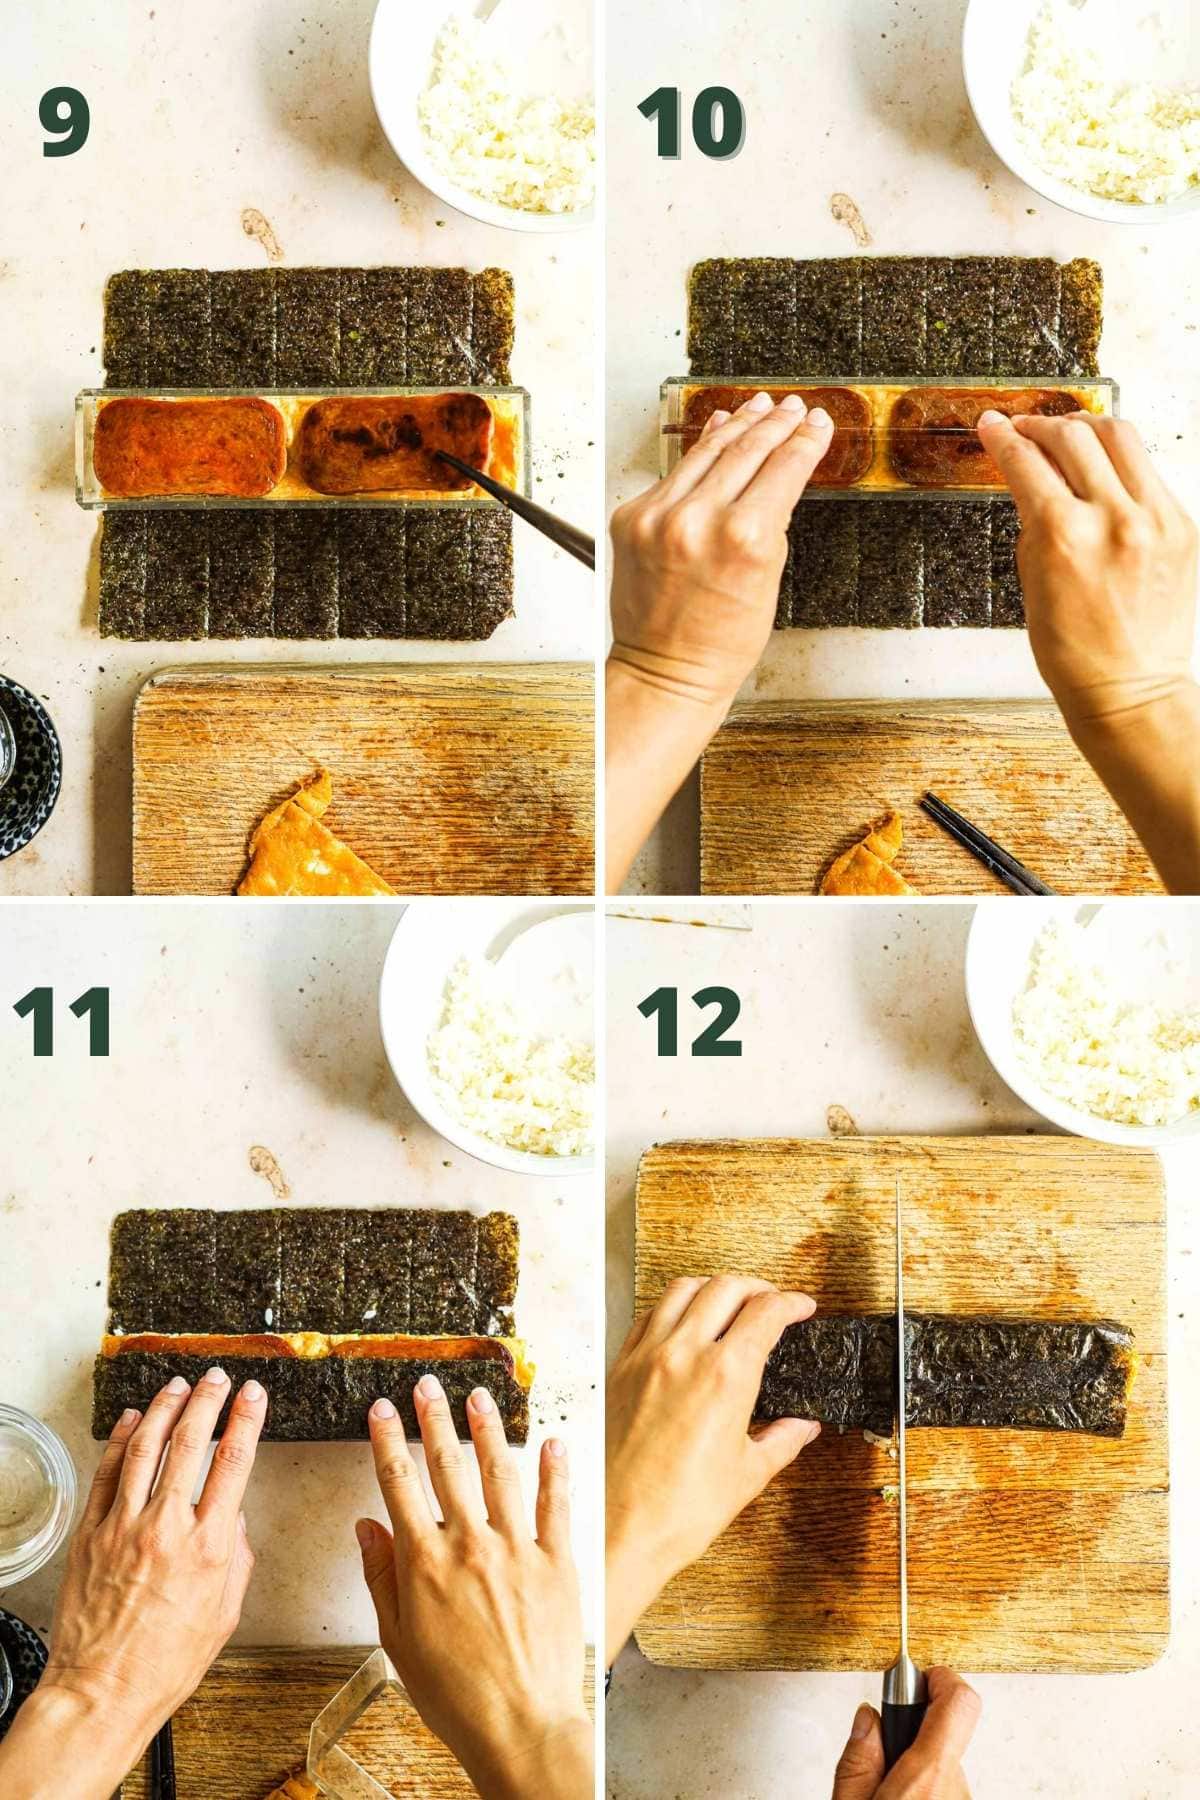 Steps to make spam musubi with egg, including adding the spam to the mold, pressing the mold, wrapping the musubi with nori, and cutting the musubi in half.